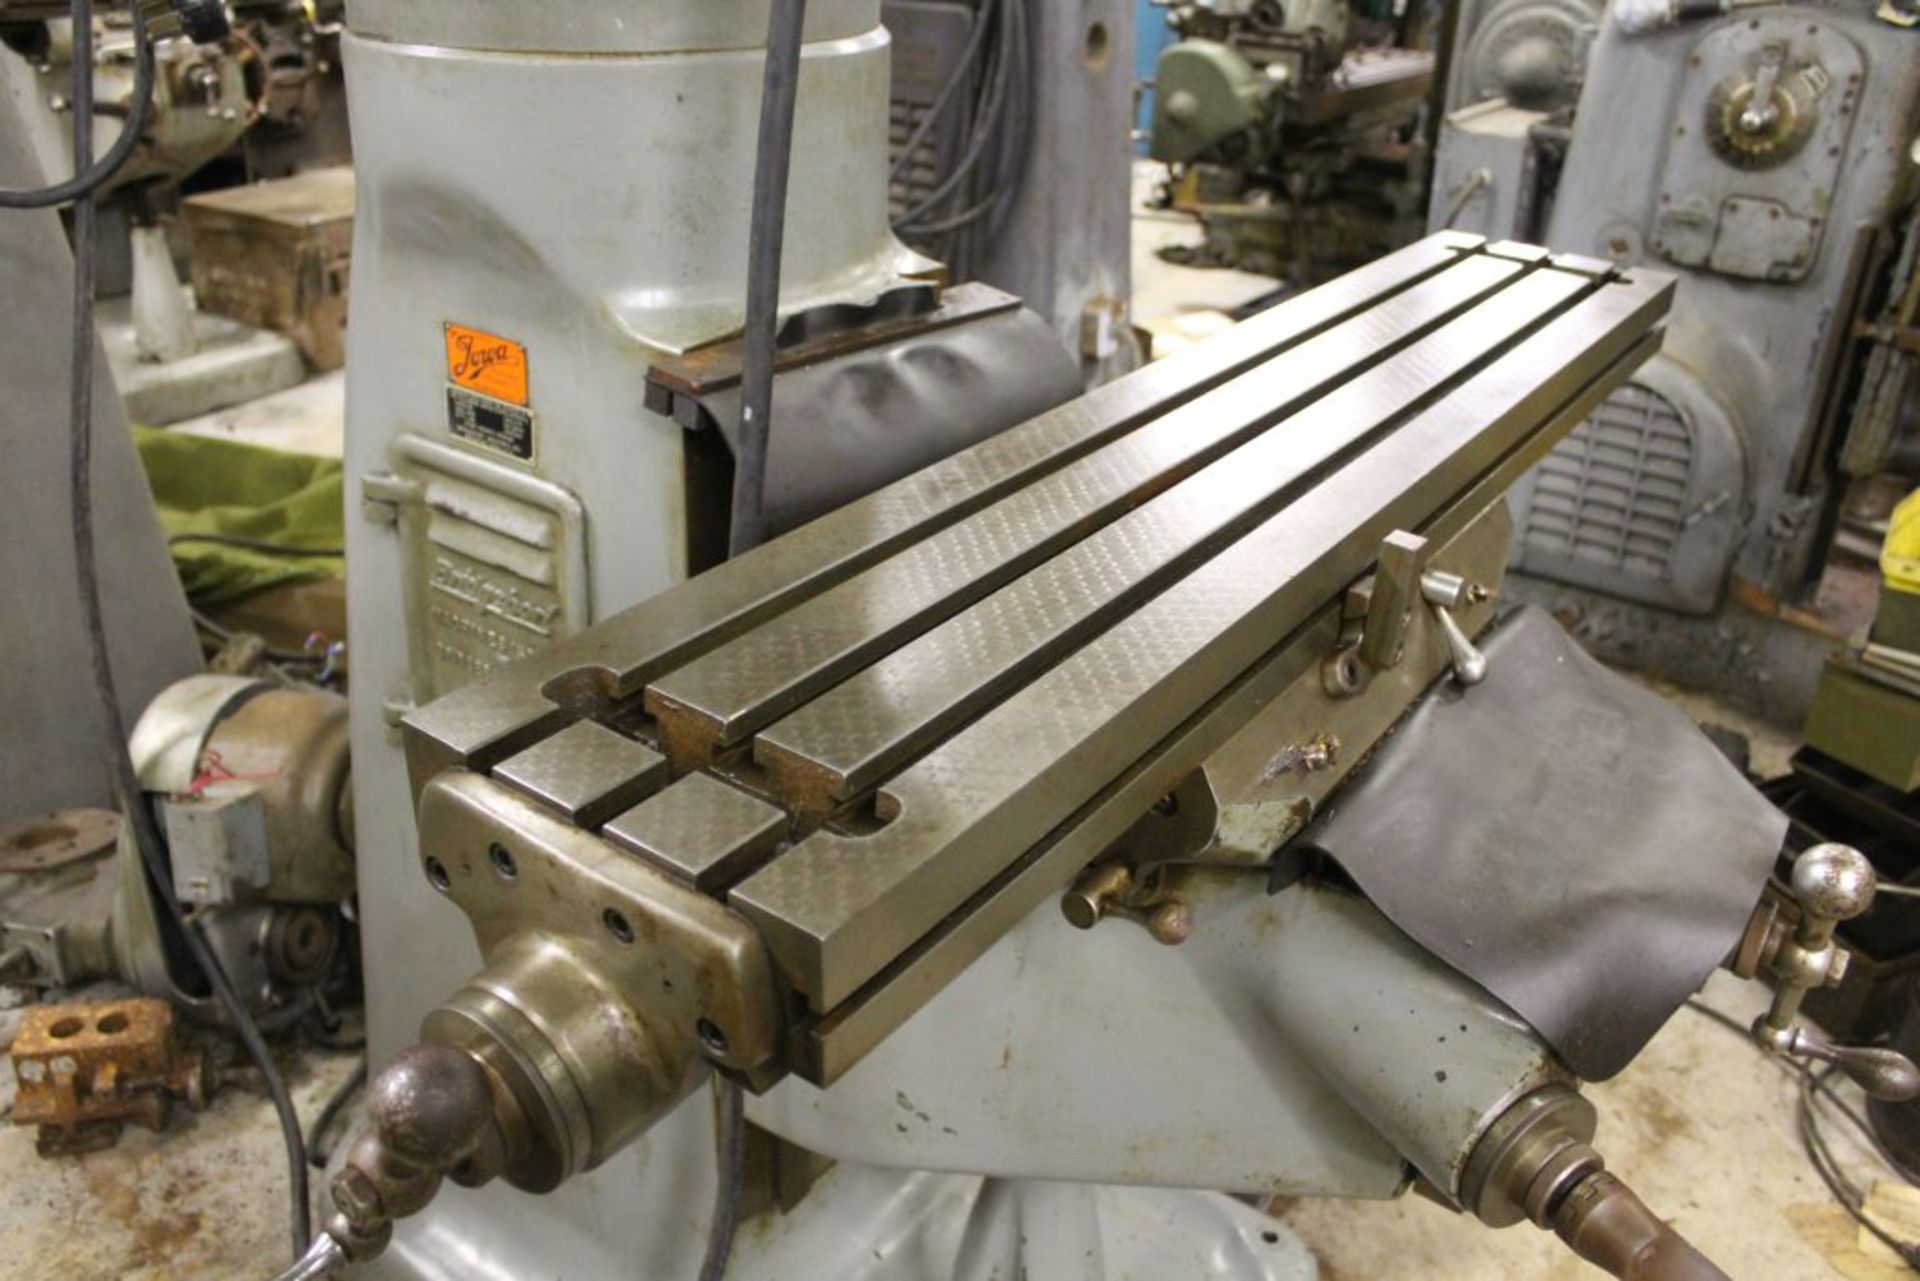 Bridgeport mill, model 12-BR, sn 83978, 9" x 48" bed, manual (not down power), shaping attachment. - Image 4 of 15